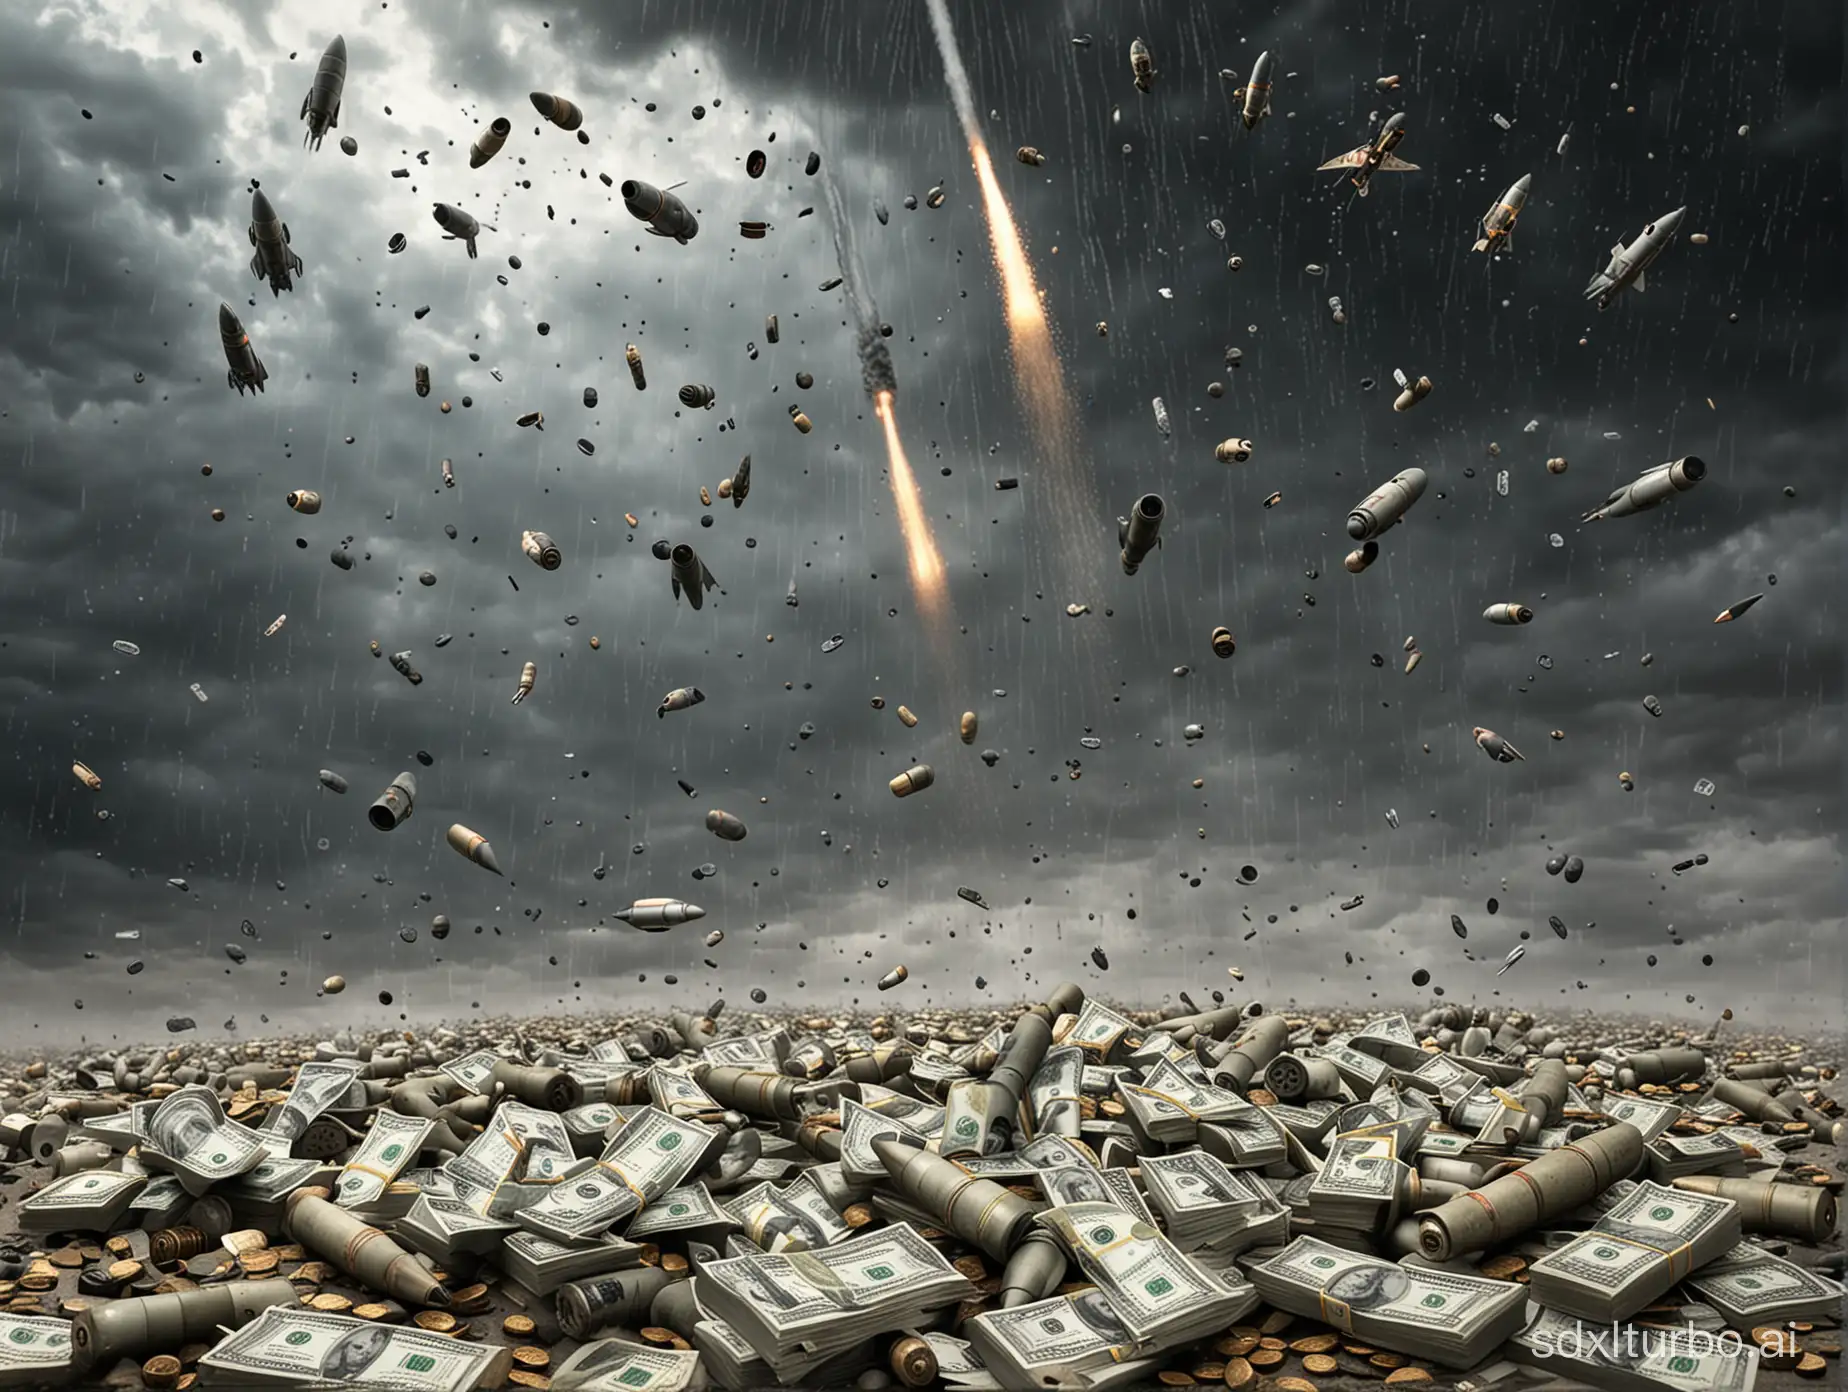 A very photo realistic image showing lot of bombs and rockets raining down from a very gloomy sky and dropping onto dollars and stacked piles of money.